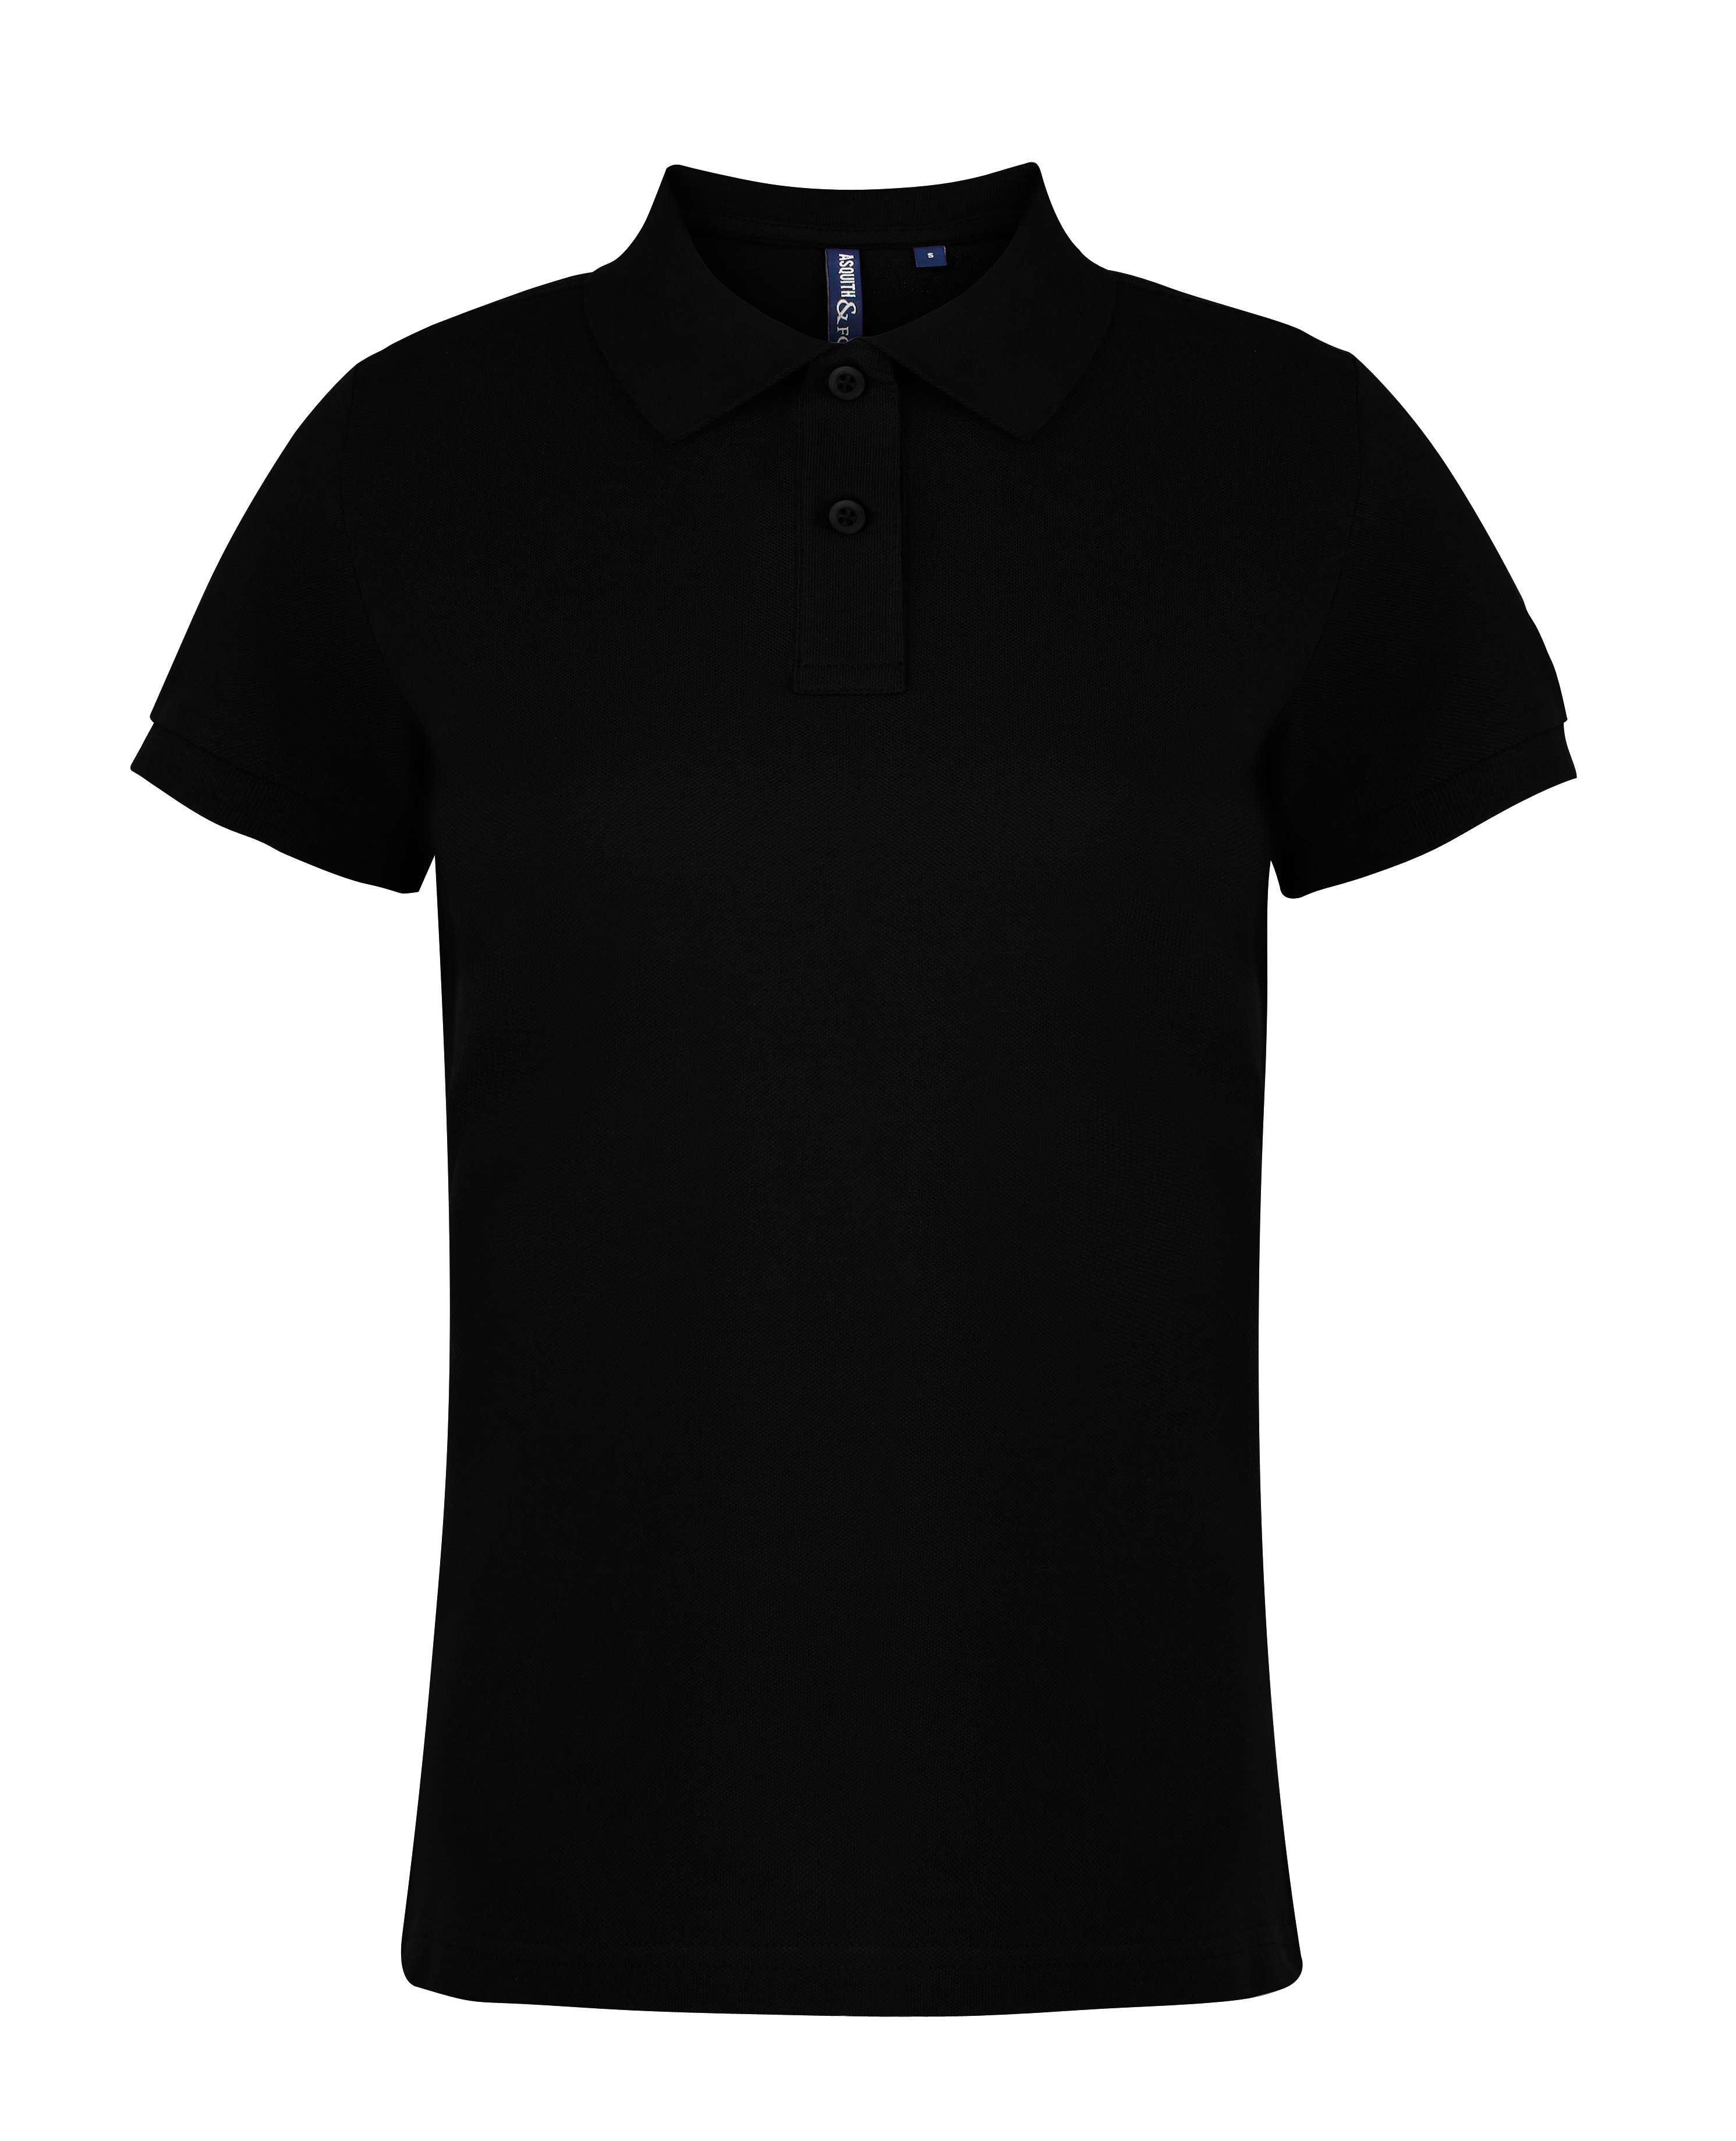 ax-httpswebsystems.s3.amazonaws.comtmp_for_downloadasquith-and-fox-womens-polo-black.jpg